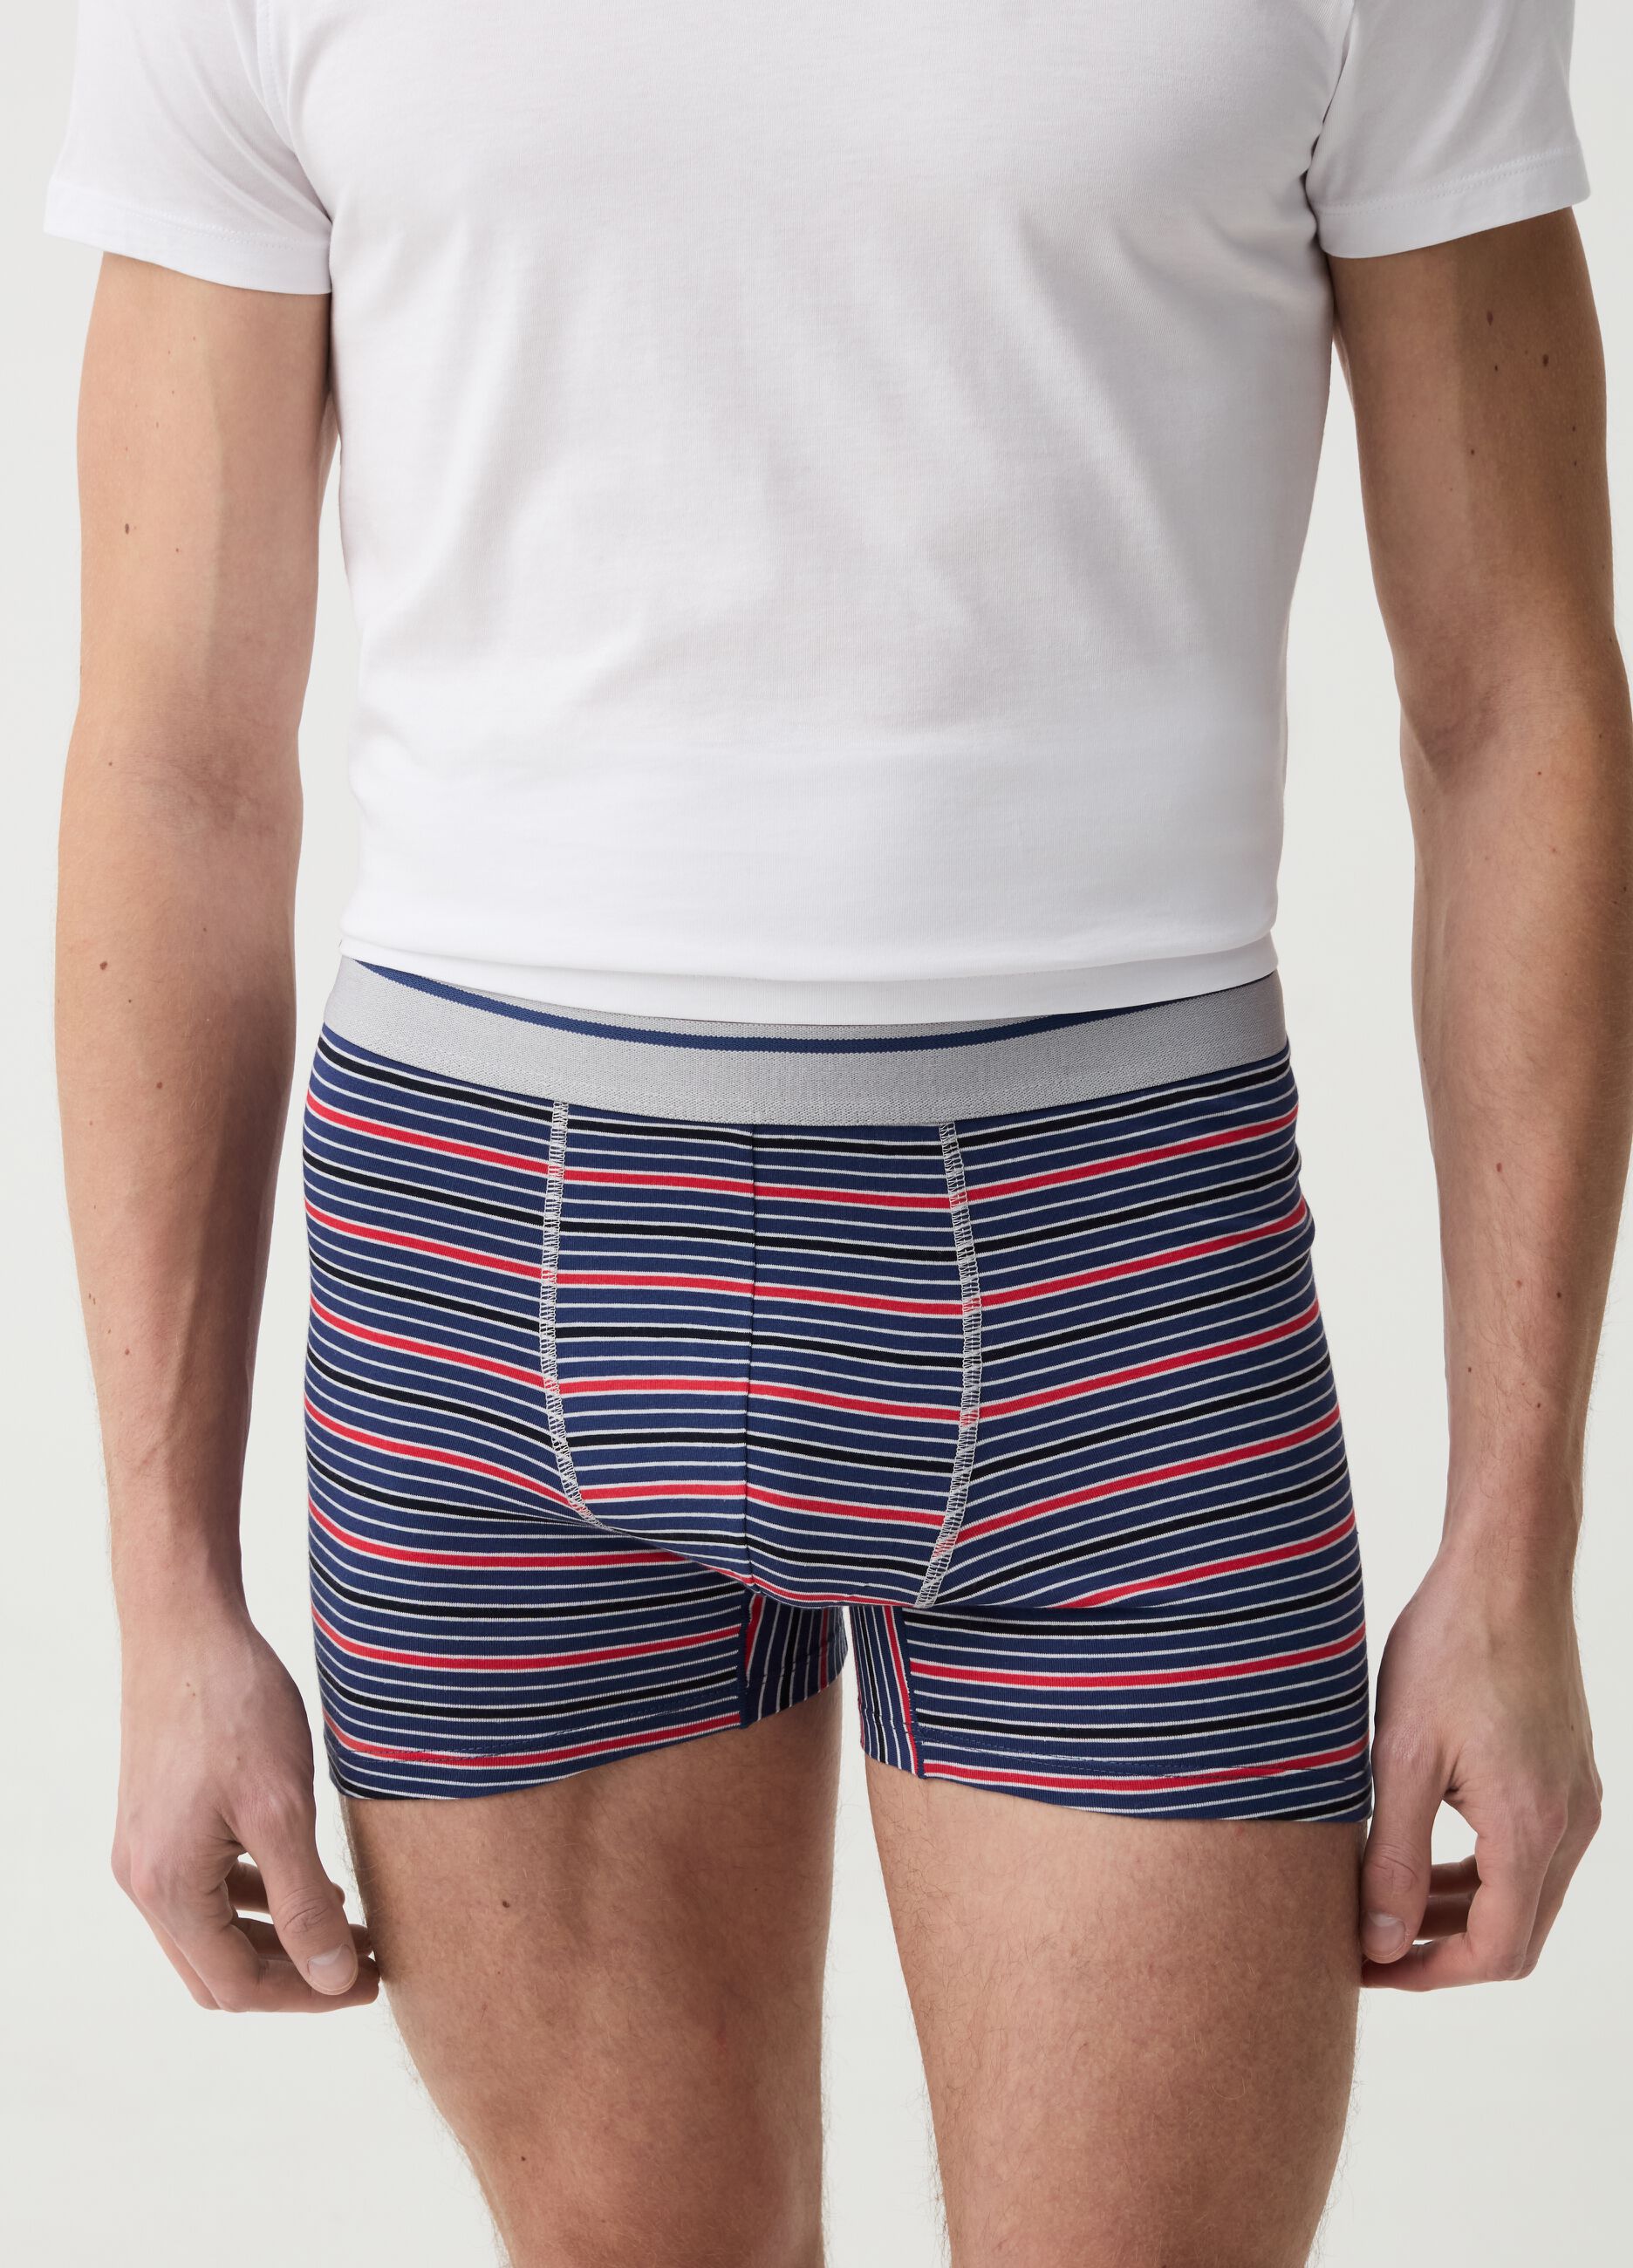 Three-pack boxer shorts with striped patterned edging